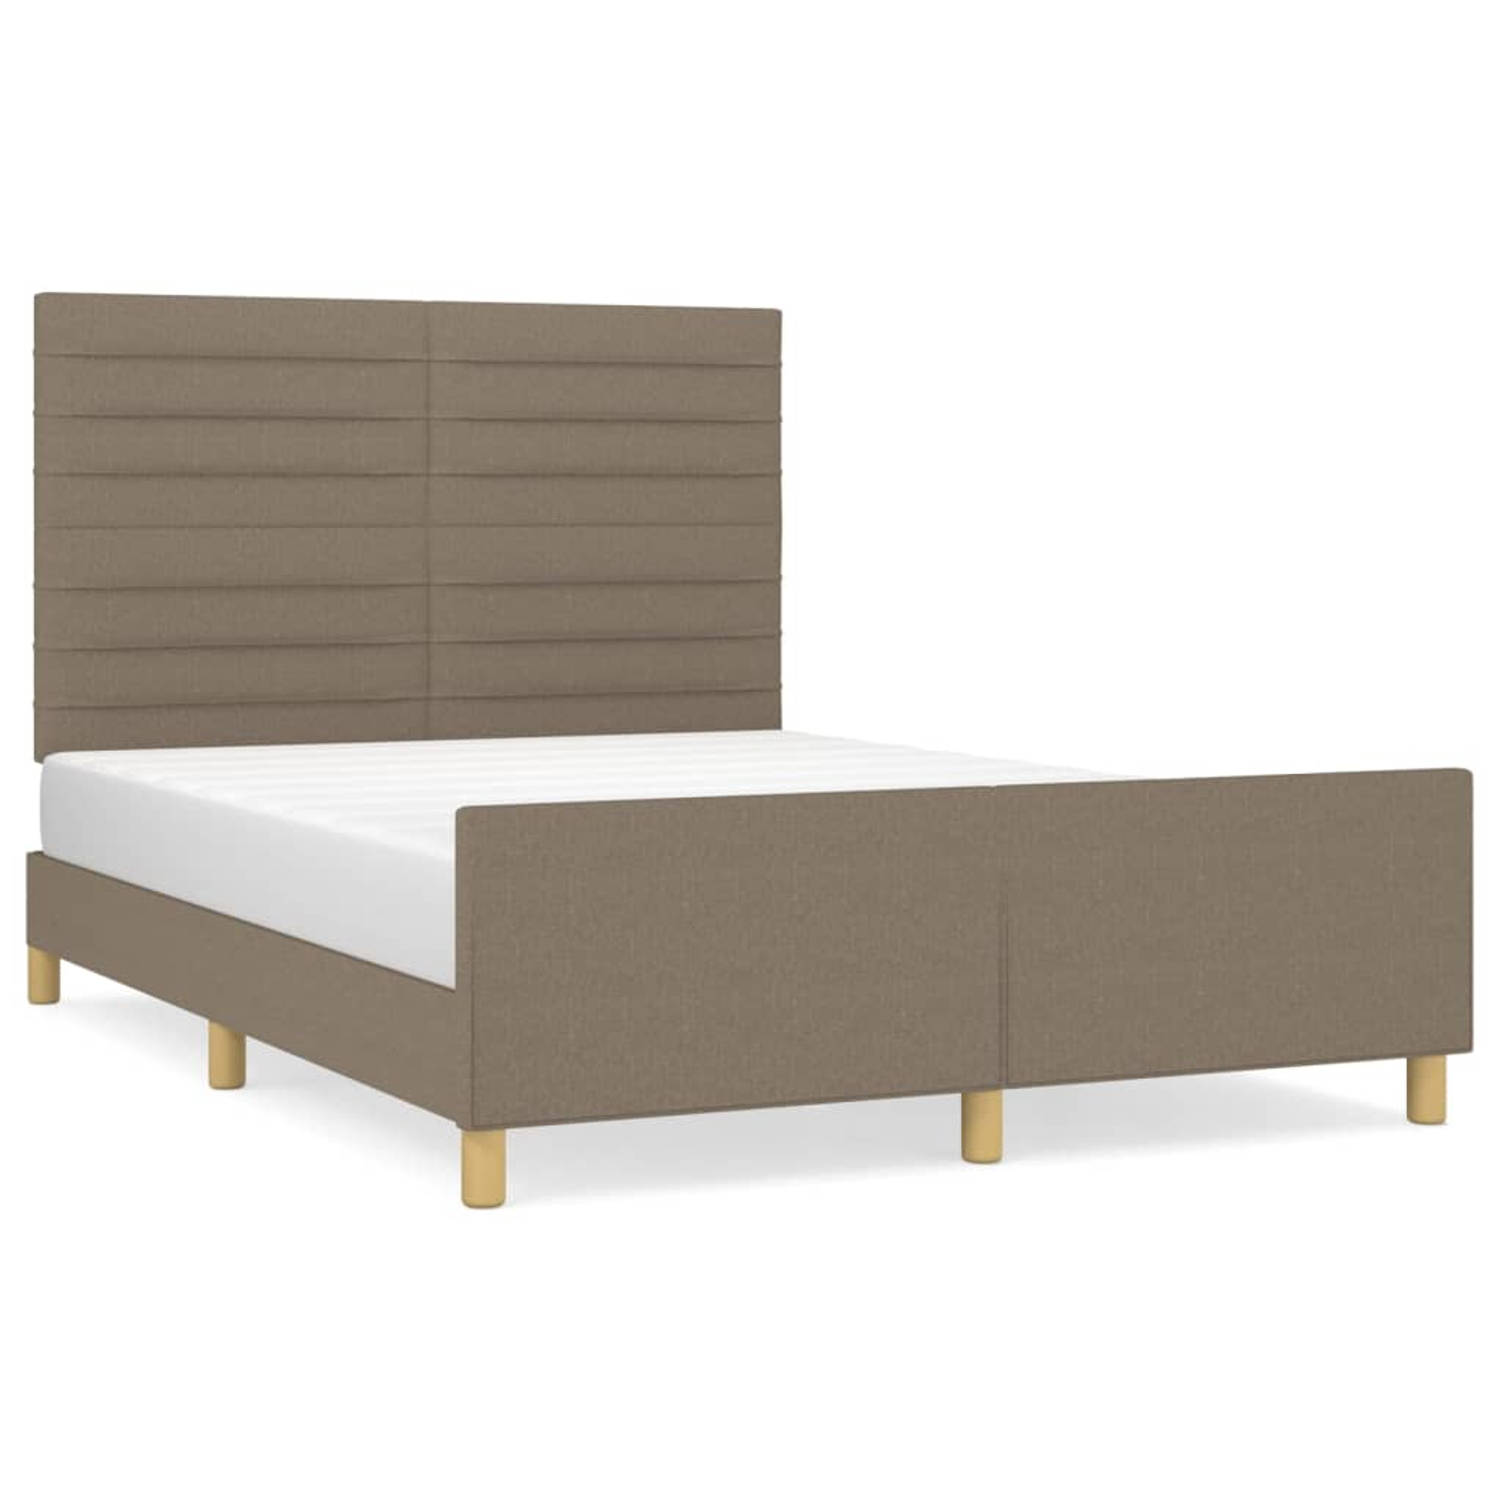 The Living Store Bedframe - - Hoofdeinde - 193 x 146 x 118/128 cm - Taupe